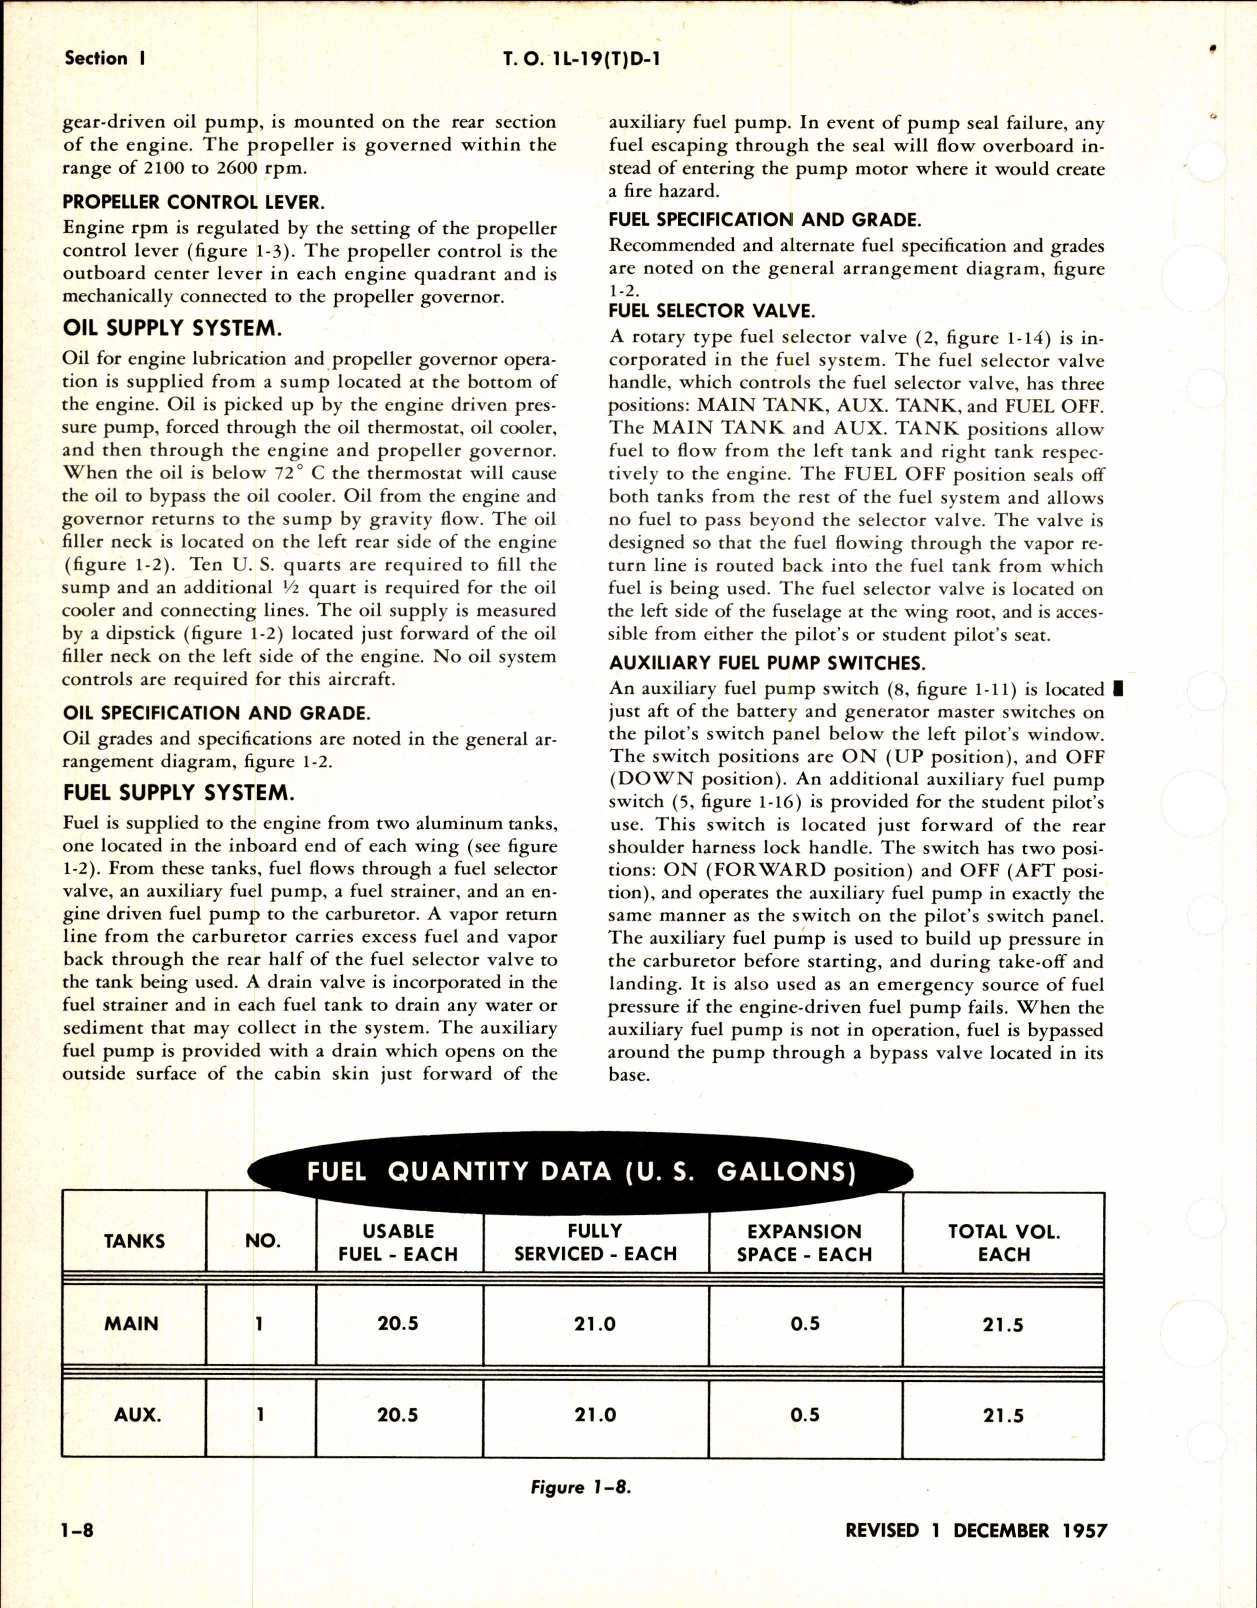 Sample page 6 from AirCorps Library document: Flight Handbook for TL-19D Aircraft